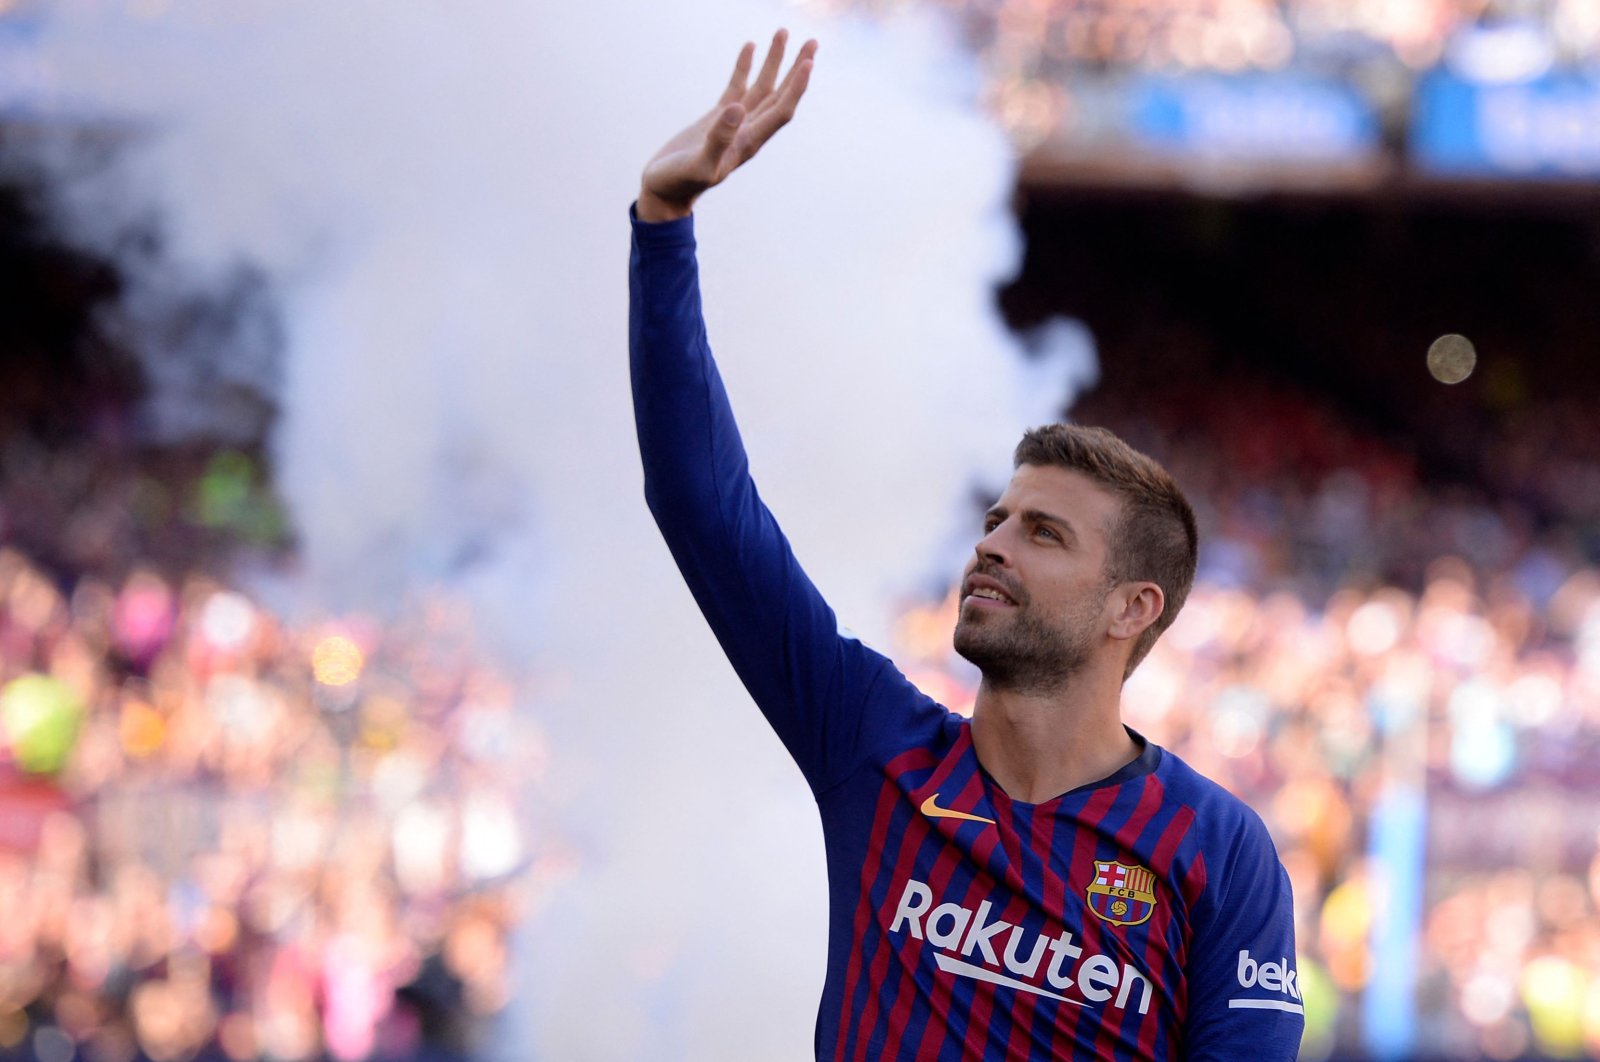 Barcelona&#039;s Spanish defender Gerard Pique waves at fans before the 53rd Joan Gamper Trophy friendly football match between Barcelona and Boca Juniors at the Camp Nou stadium in Barcelona, Spain, Aug. 15, 2018. (AFP File Photo)